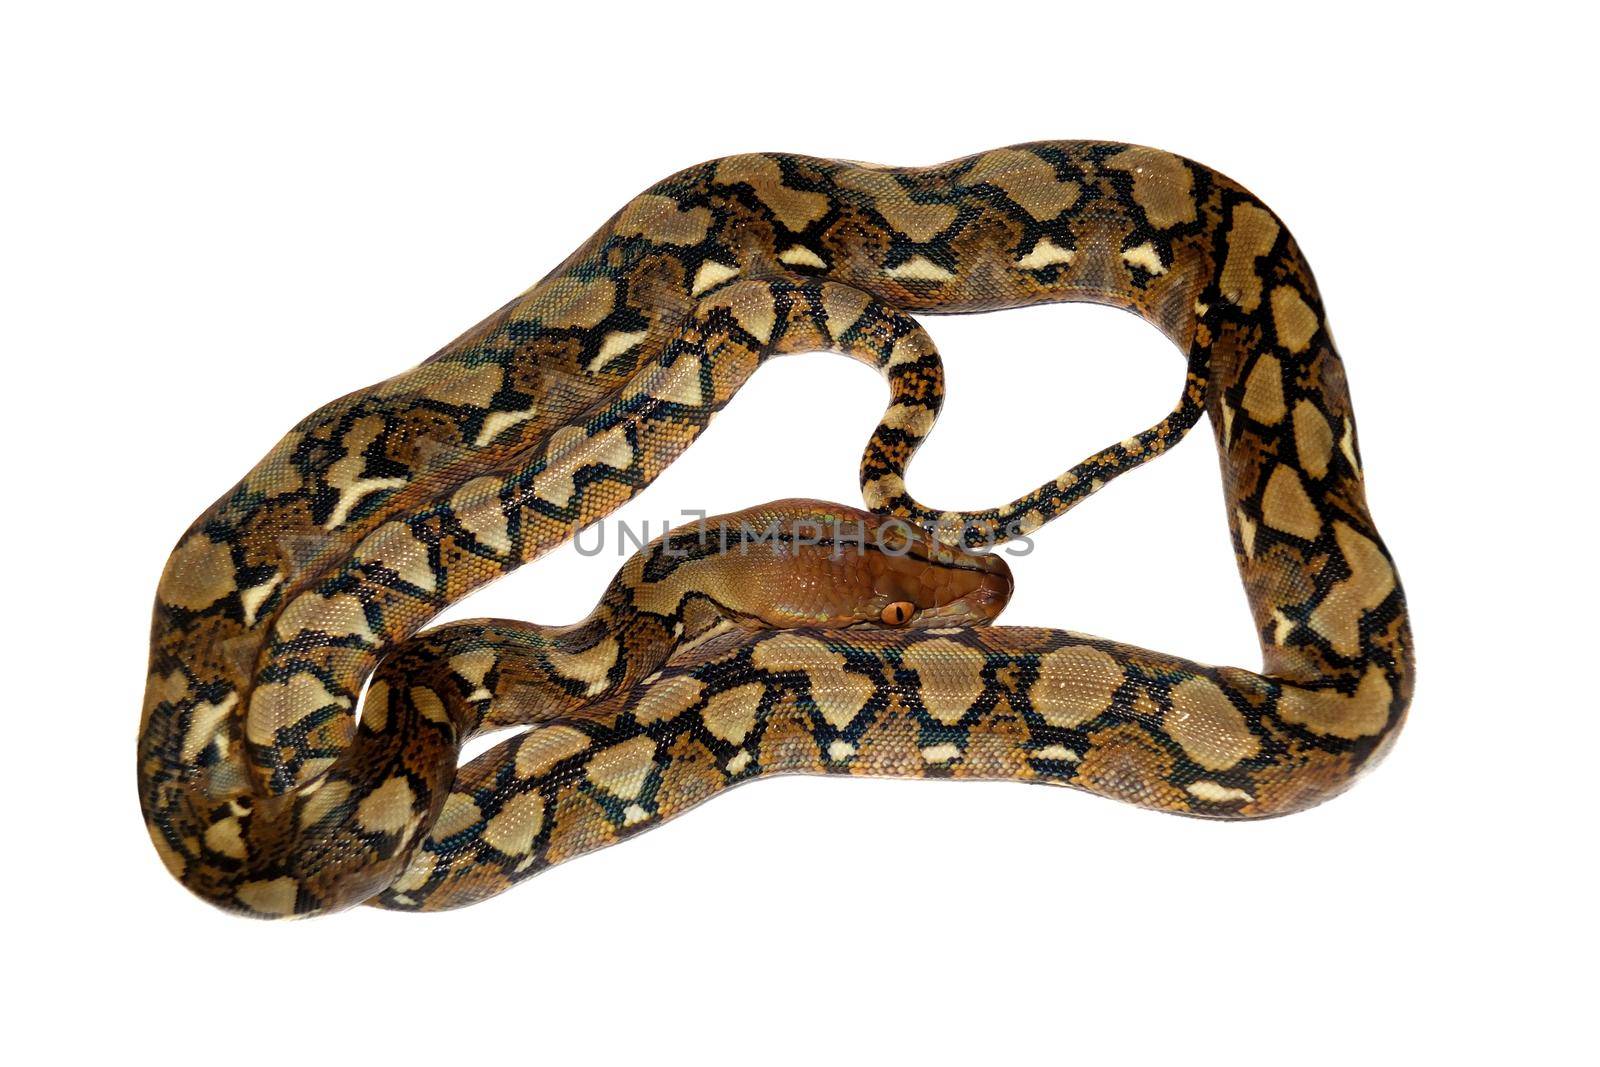 Reticulated Python, Python reticulatus, isolated on white background